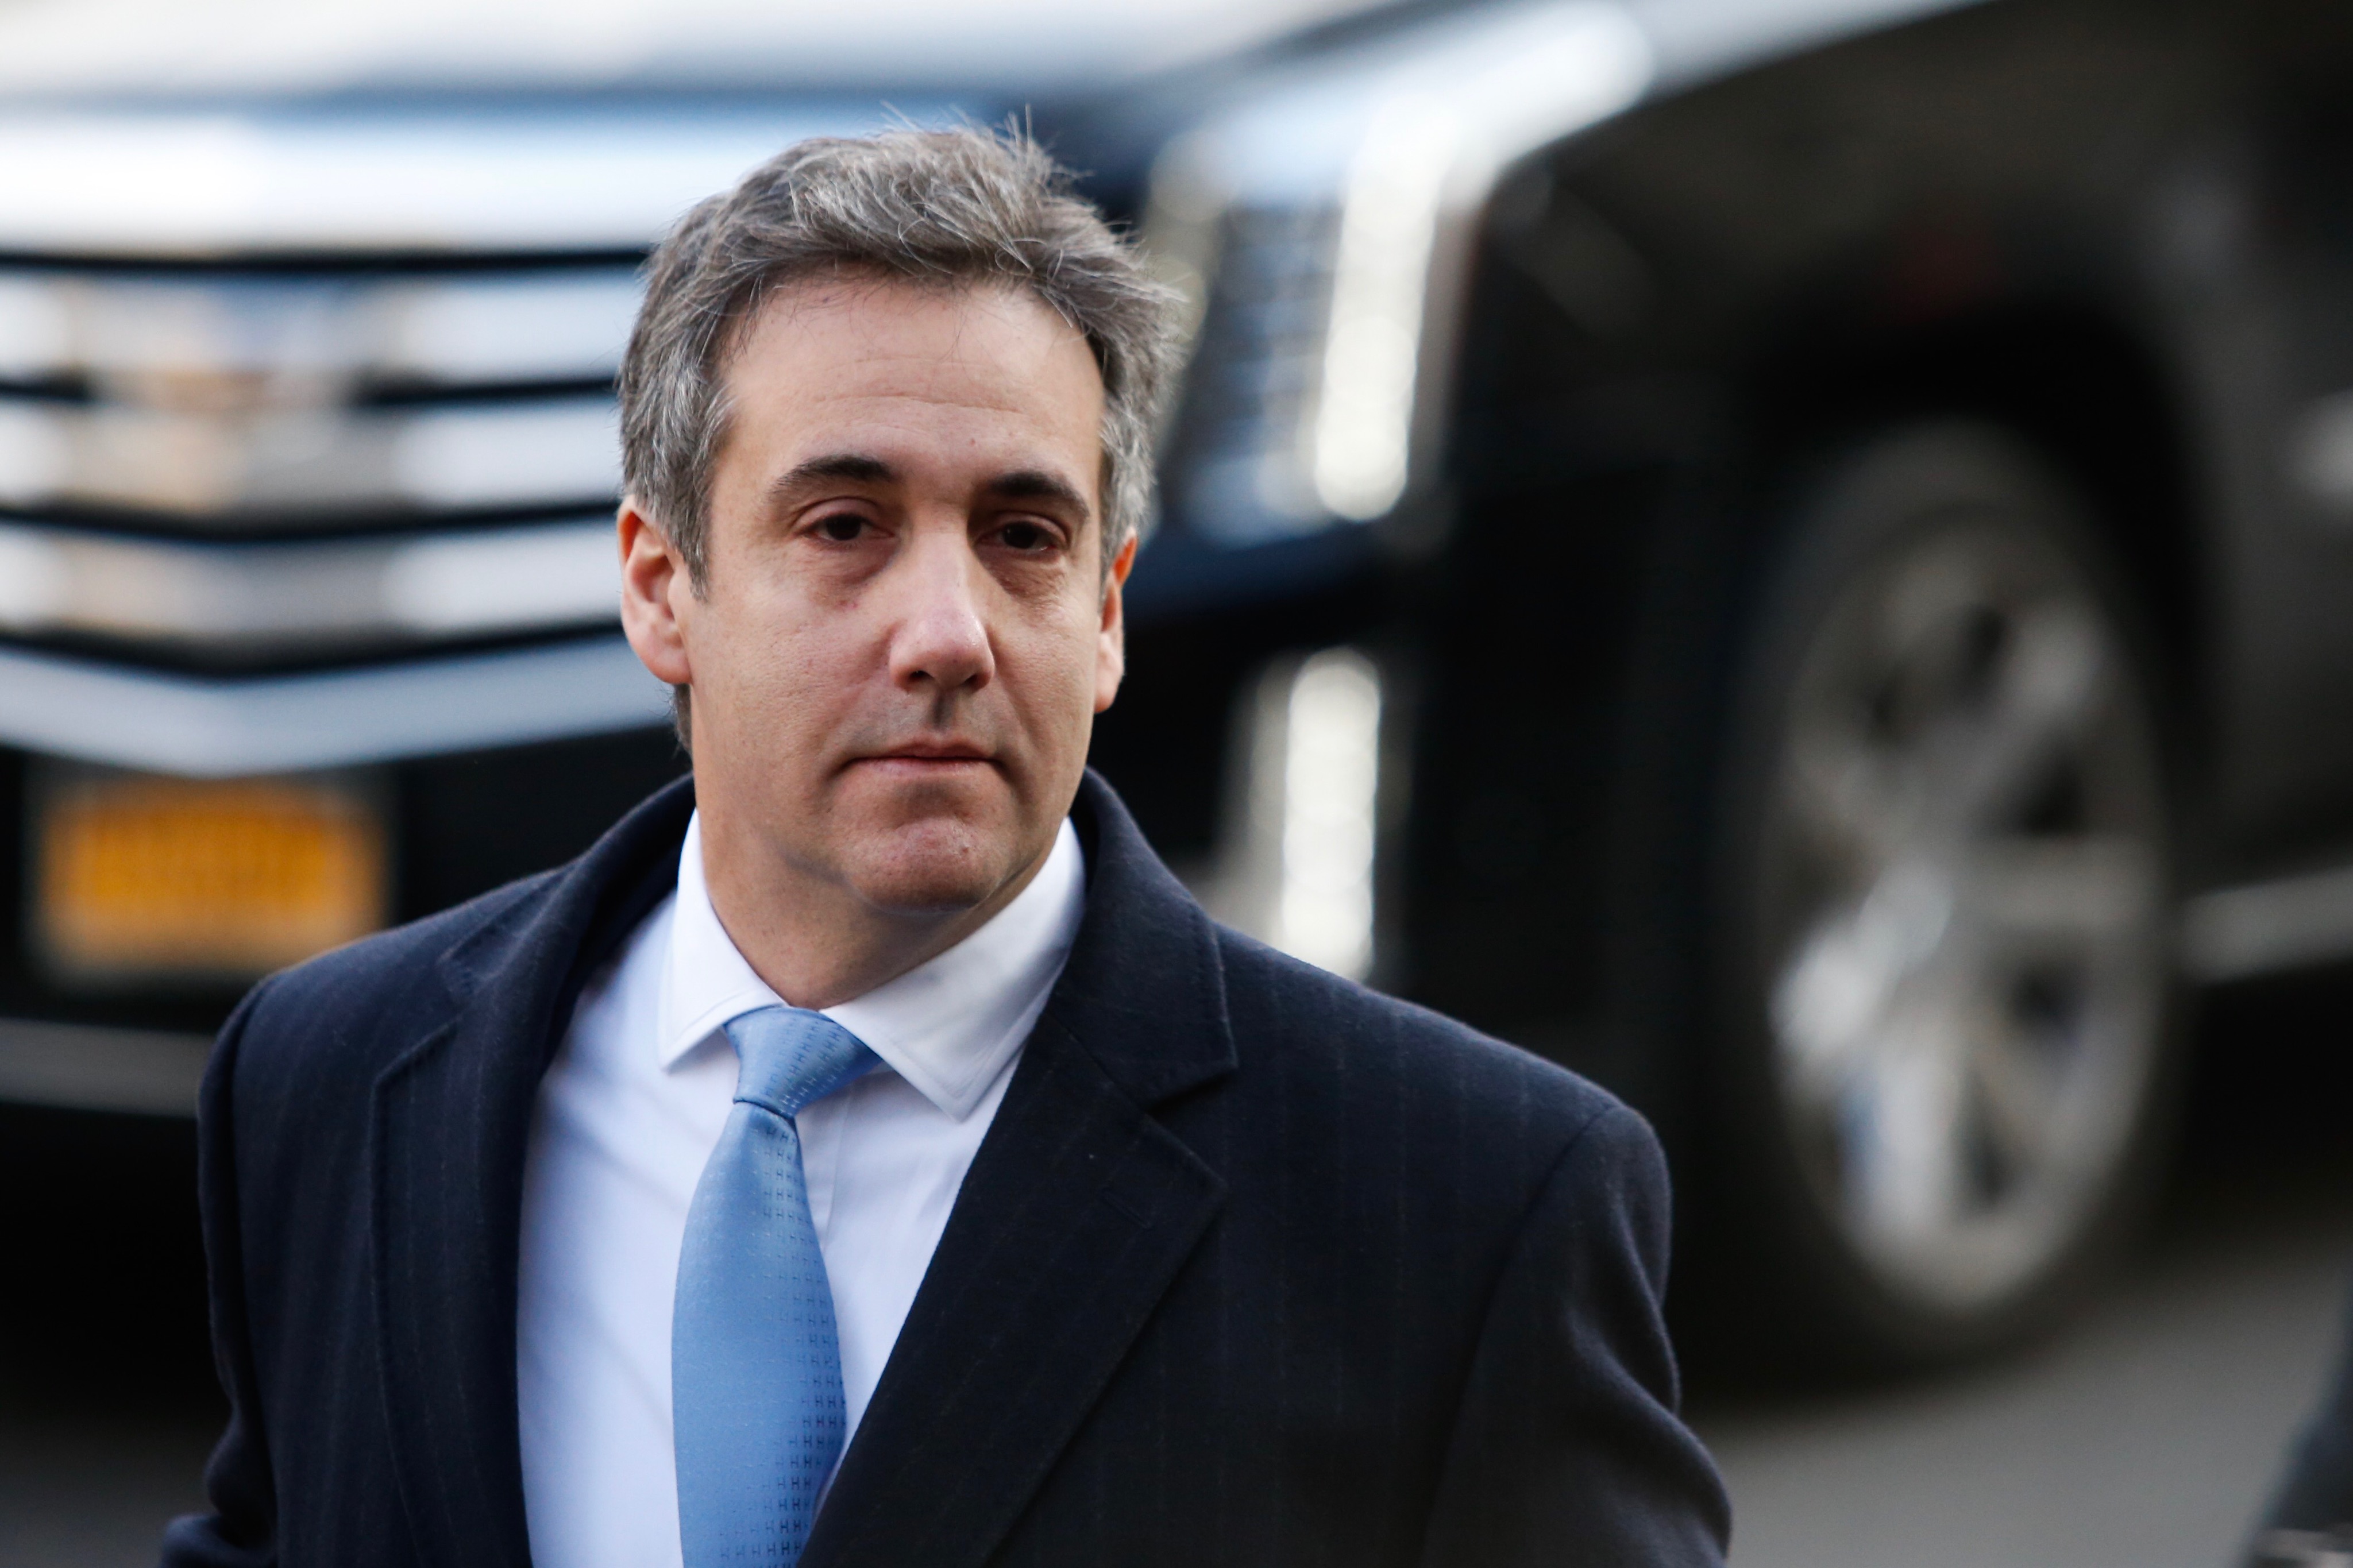 Michael Cohen, President Donald Trump's former personal attorney and fixer, arrives at federal court for his sentencing hearing, December 12, 2018 ... (Photo by Eduardo Munoz Alvarez/Getty Images)